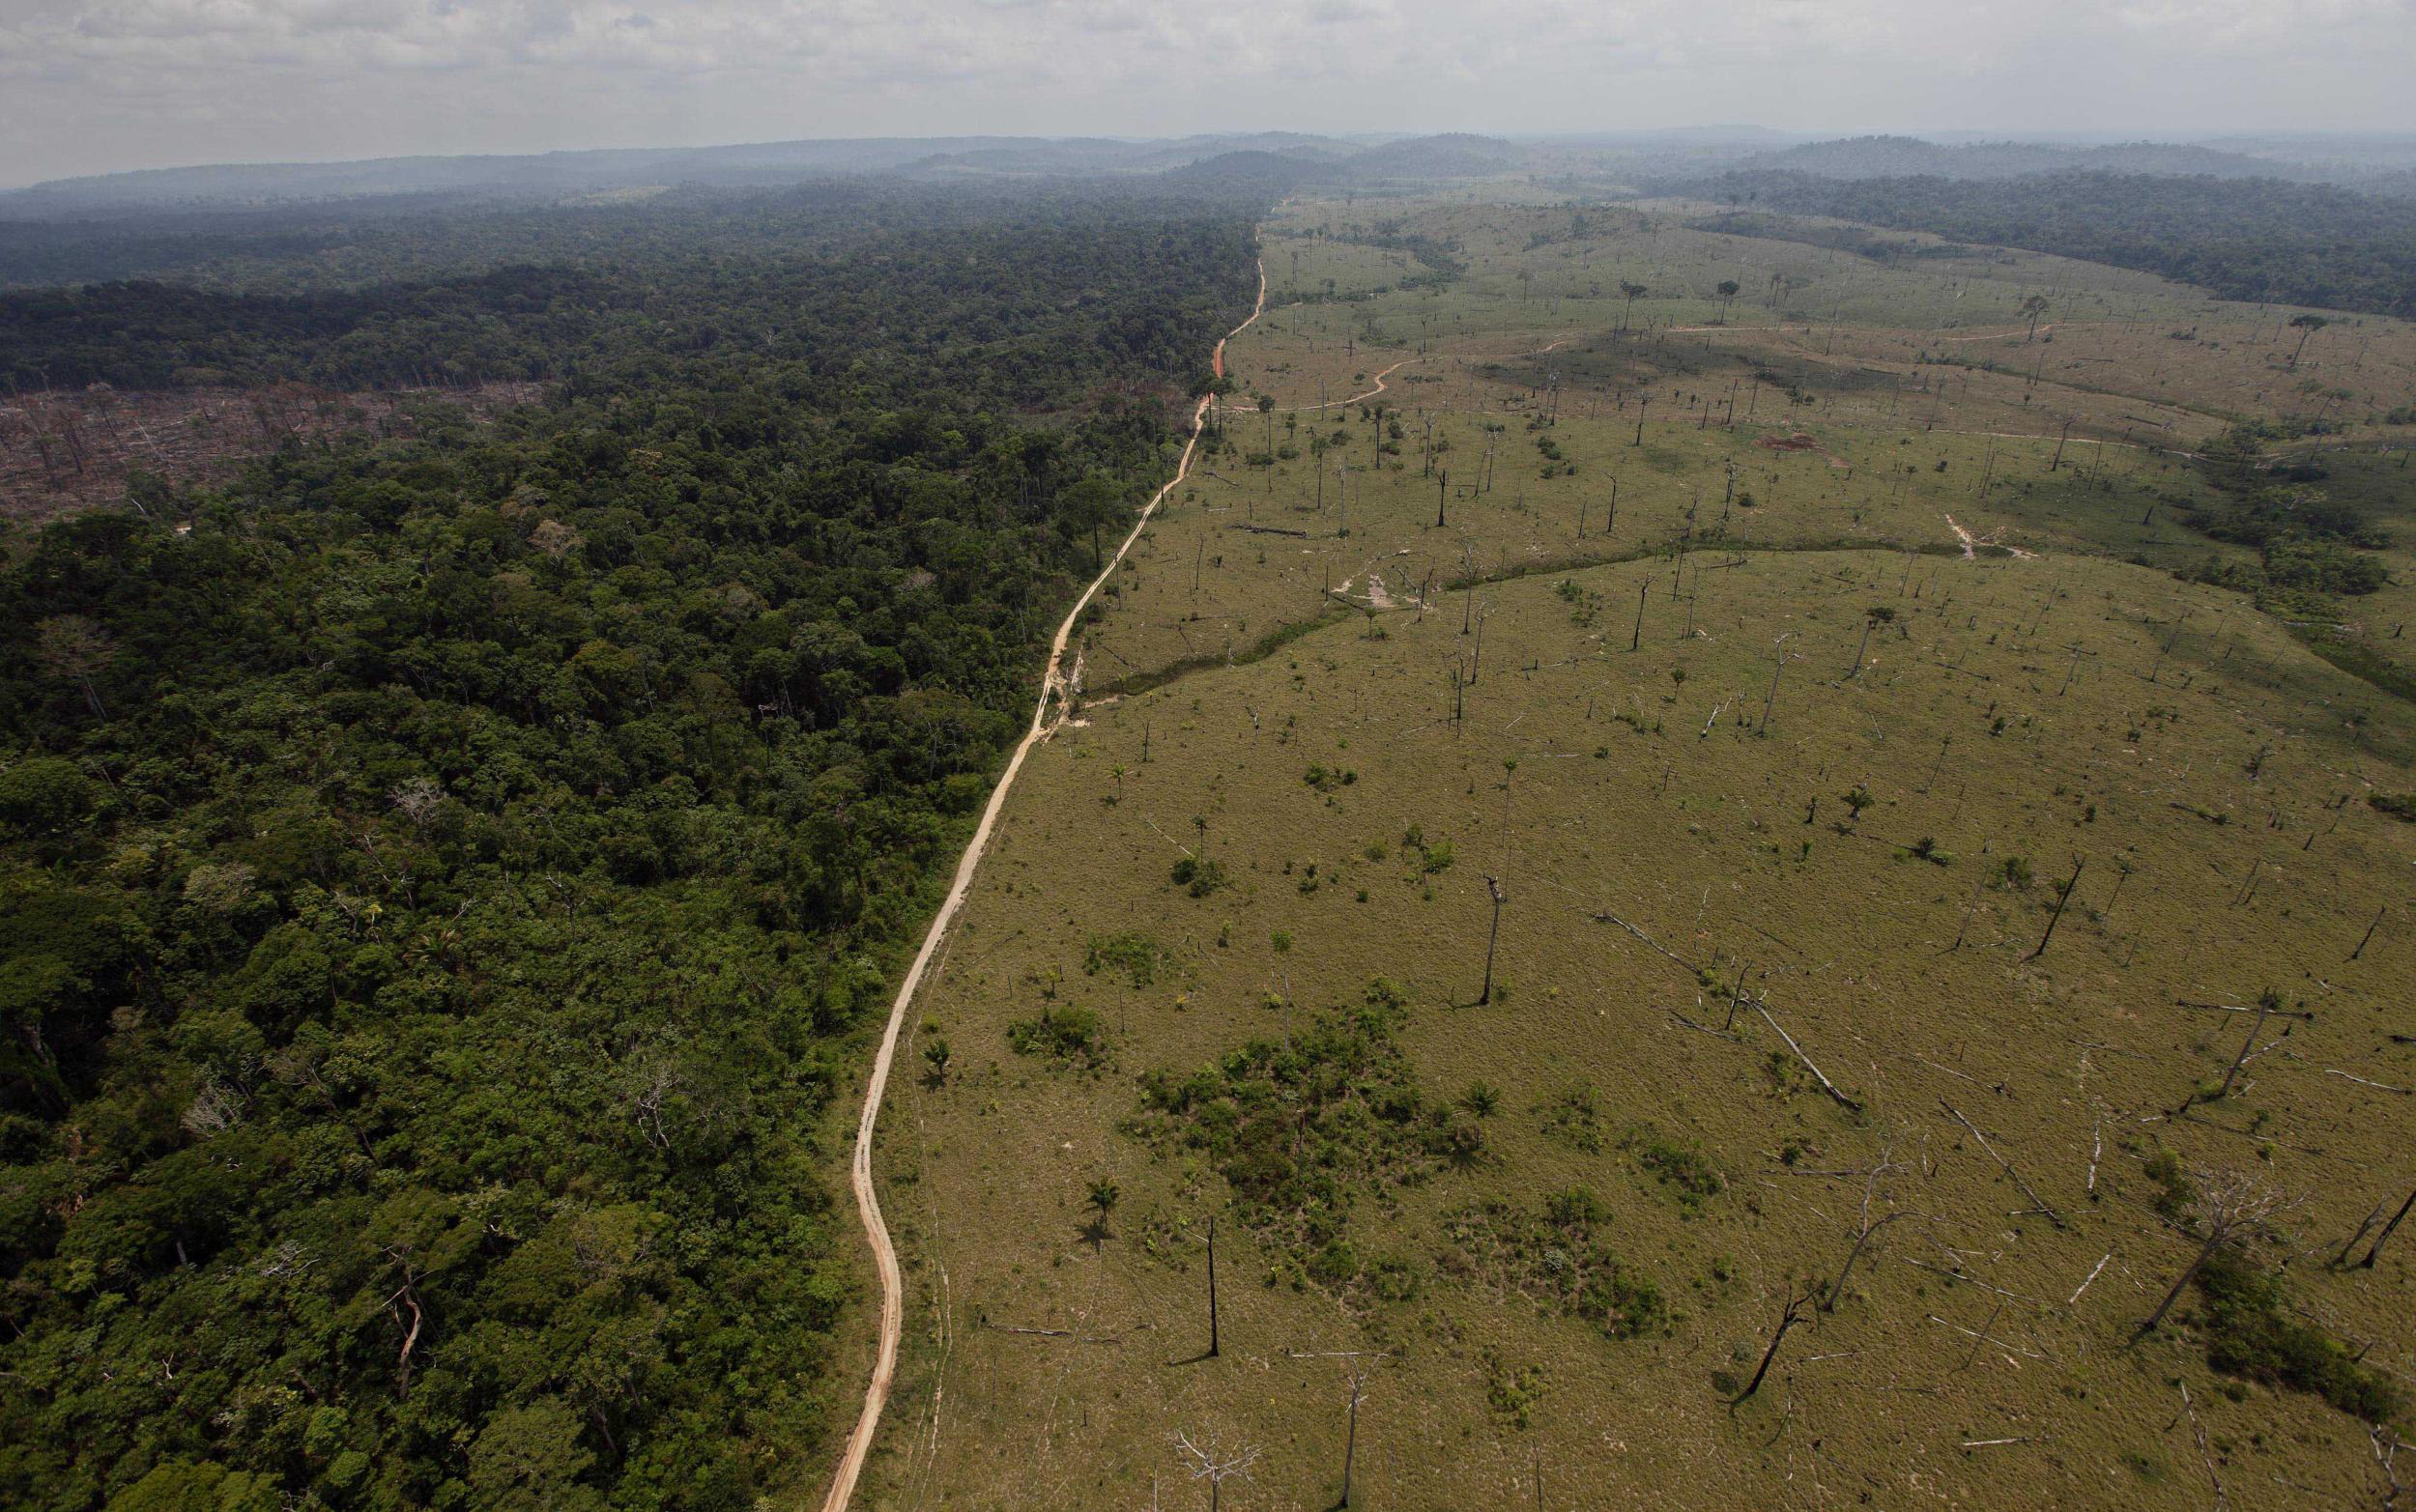 Bolsonaro has undone a number of key environmental standards in the country as he believes they hinder Brazil’s economic potential. Pictured is deforestation in the Amazon